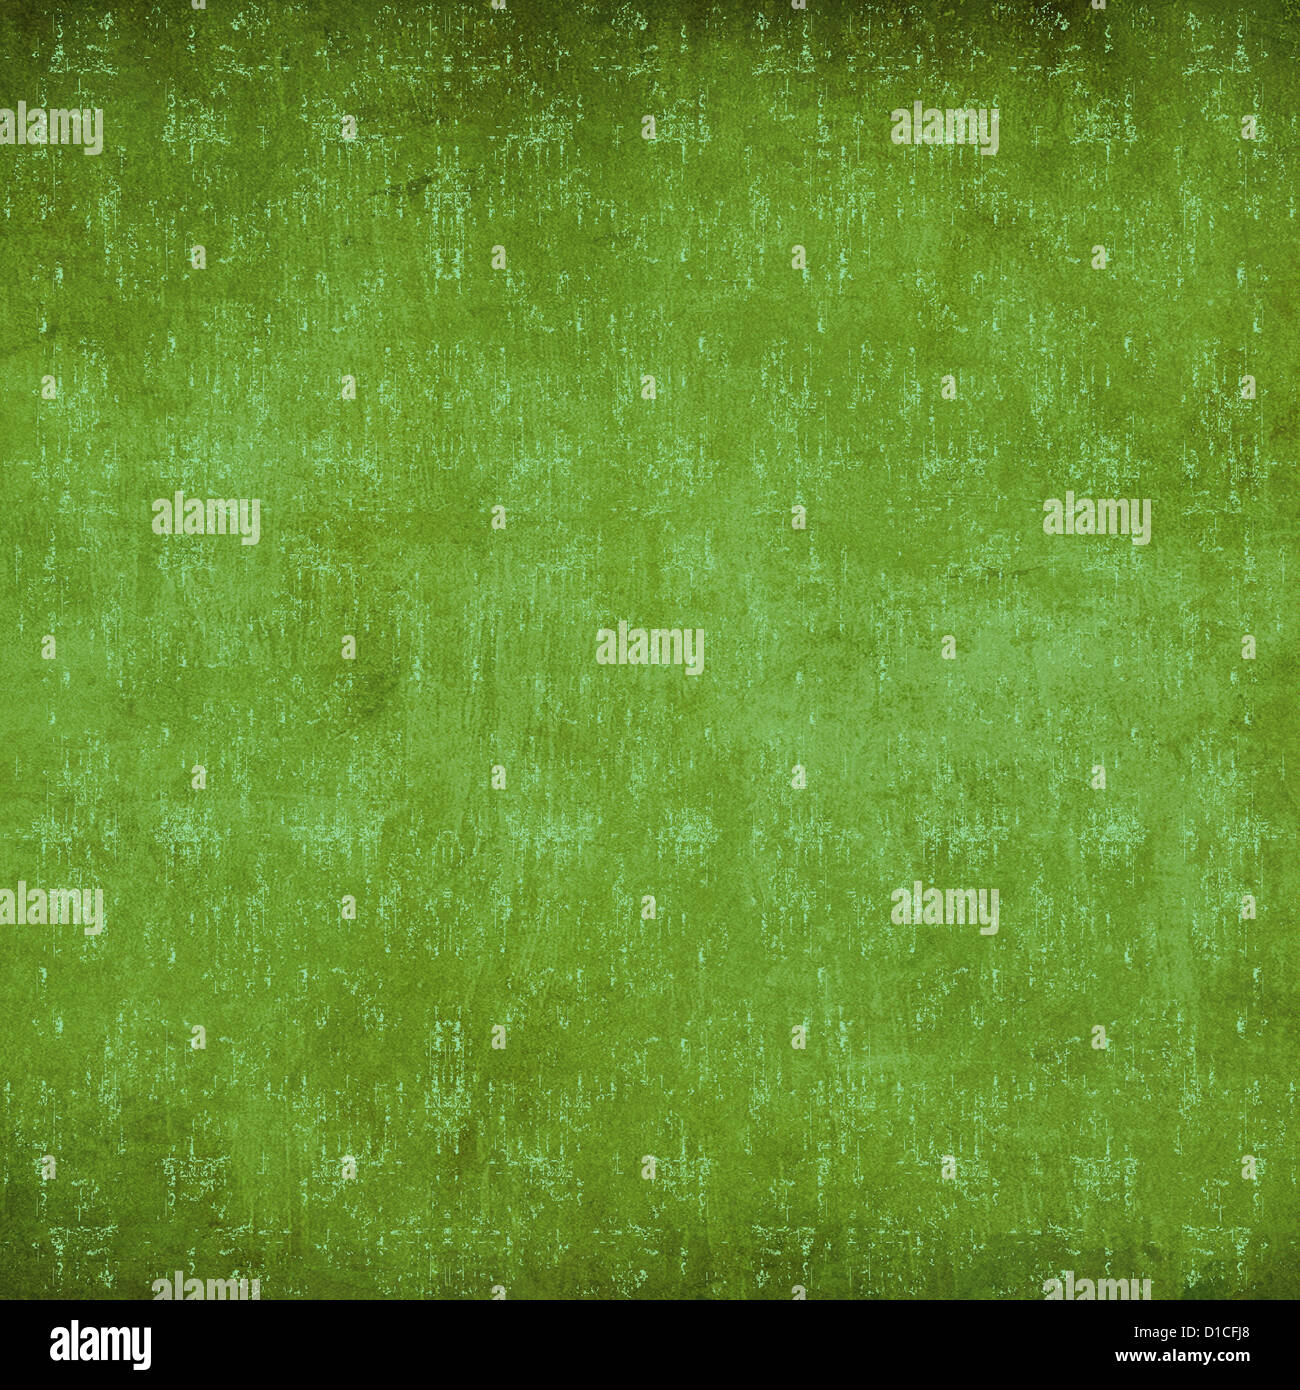 Retro green grunge paper texture background Banque D'Images